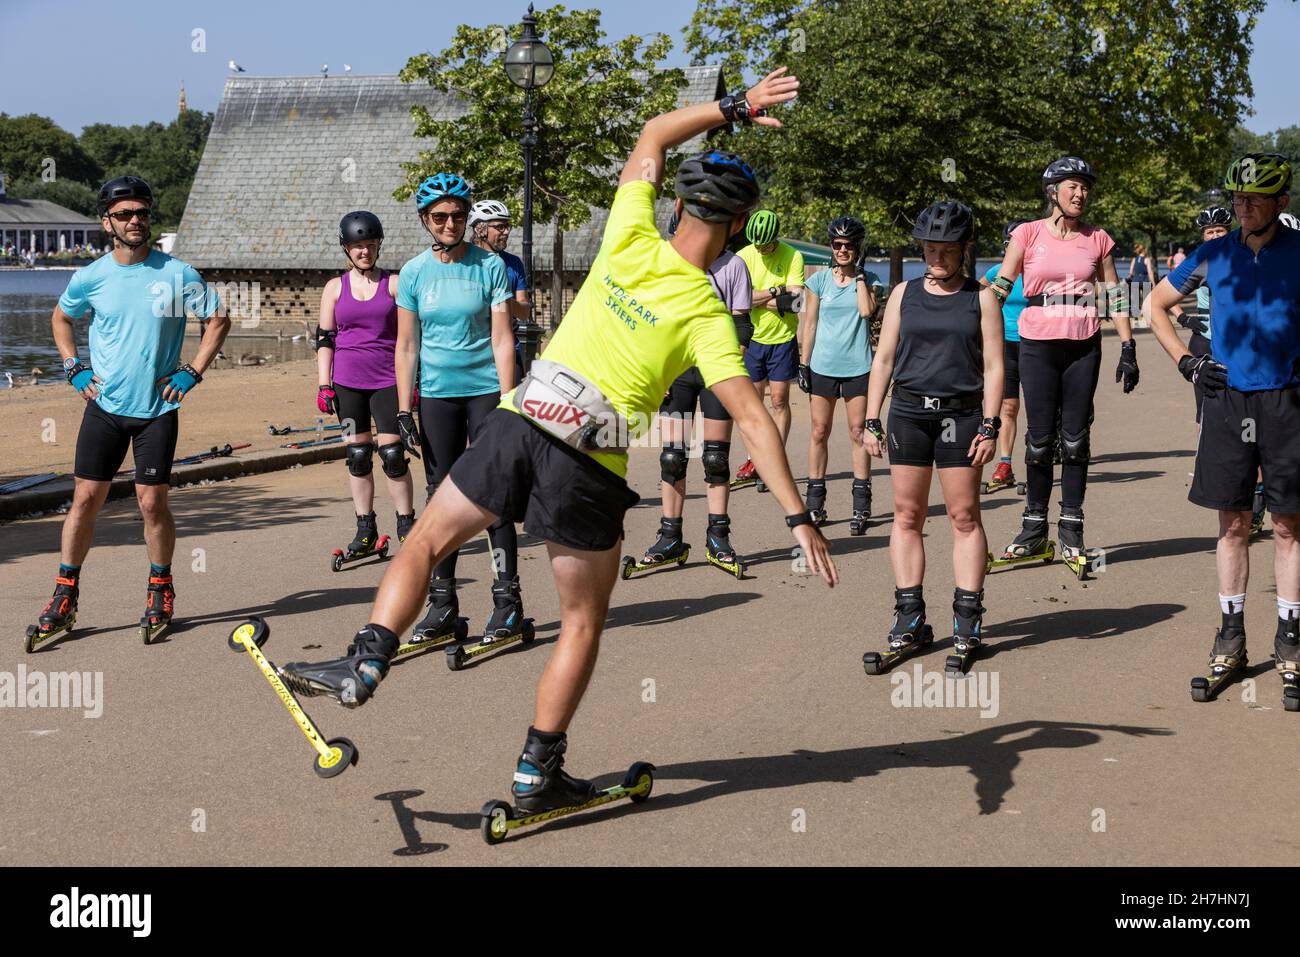 Group of people learning to roller-ski in Hyde Park, London, England UK Stock Photo